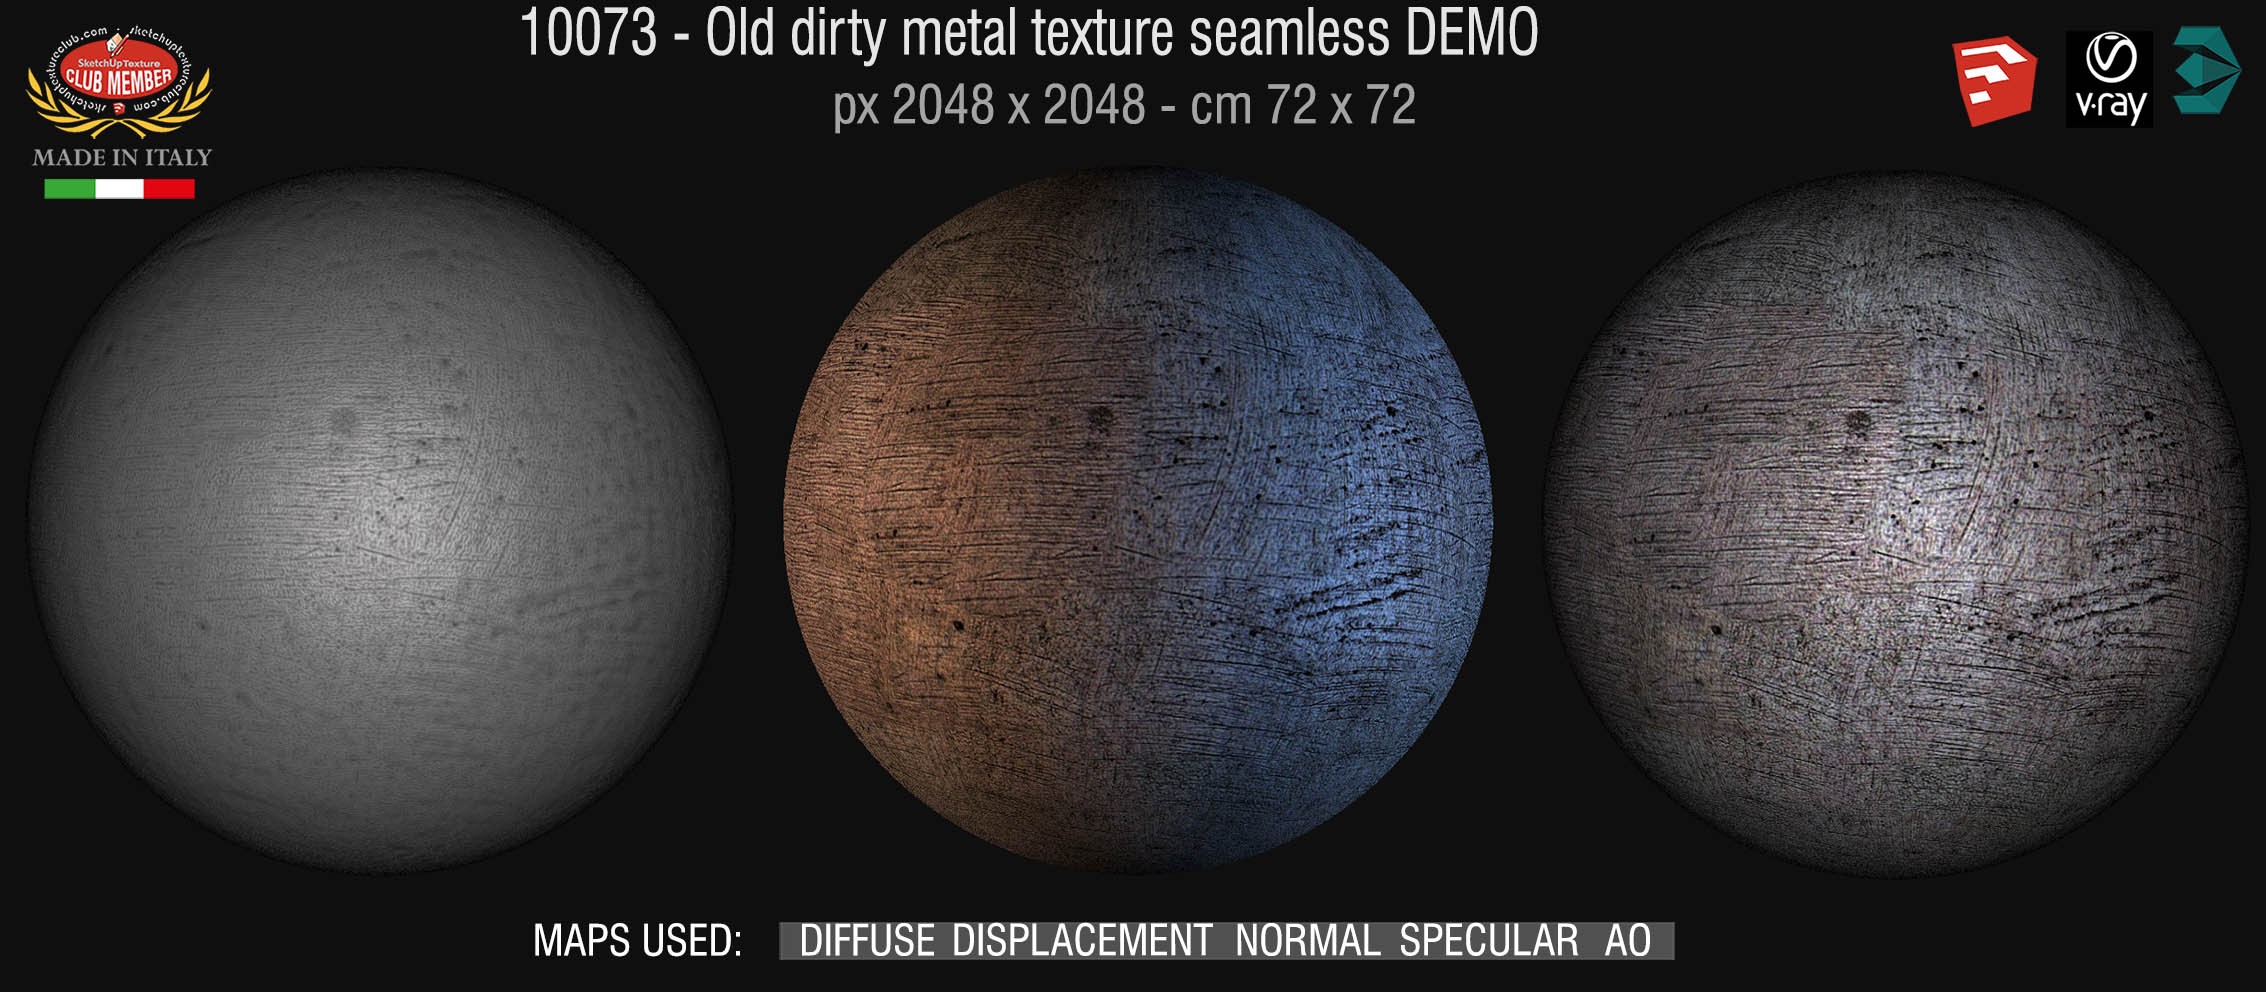 10073 HR Old dirty metal texture seamless + maps DEMO